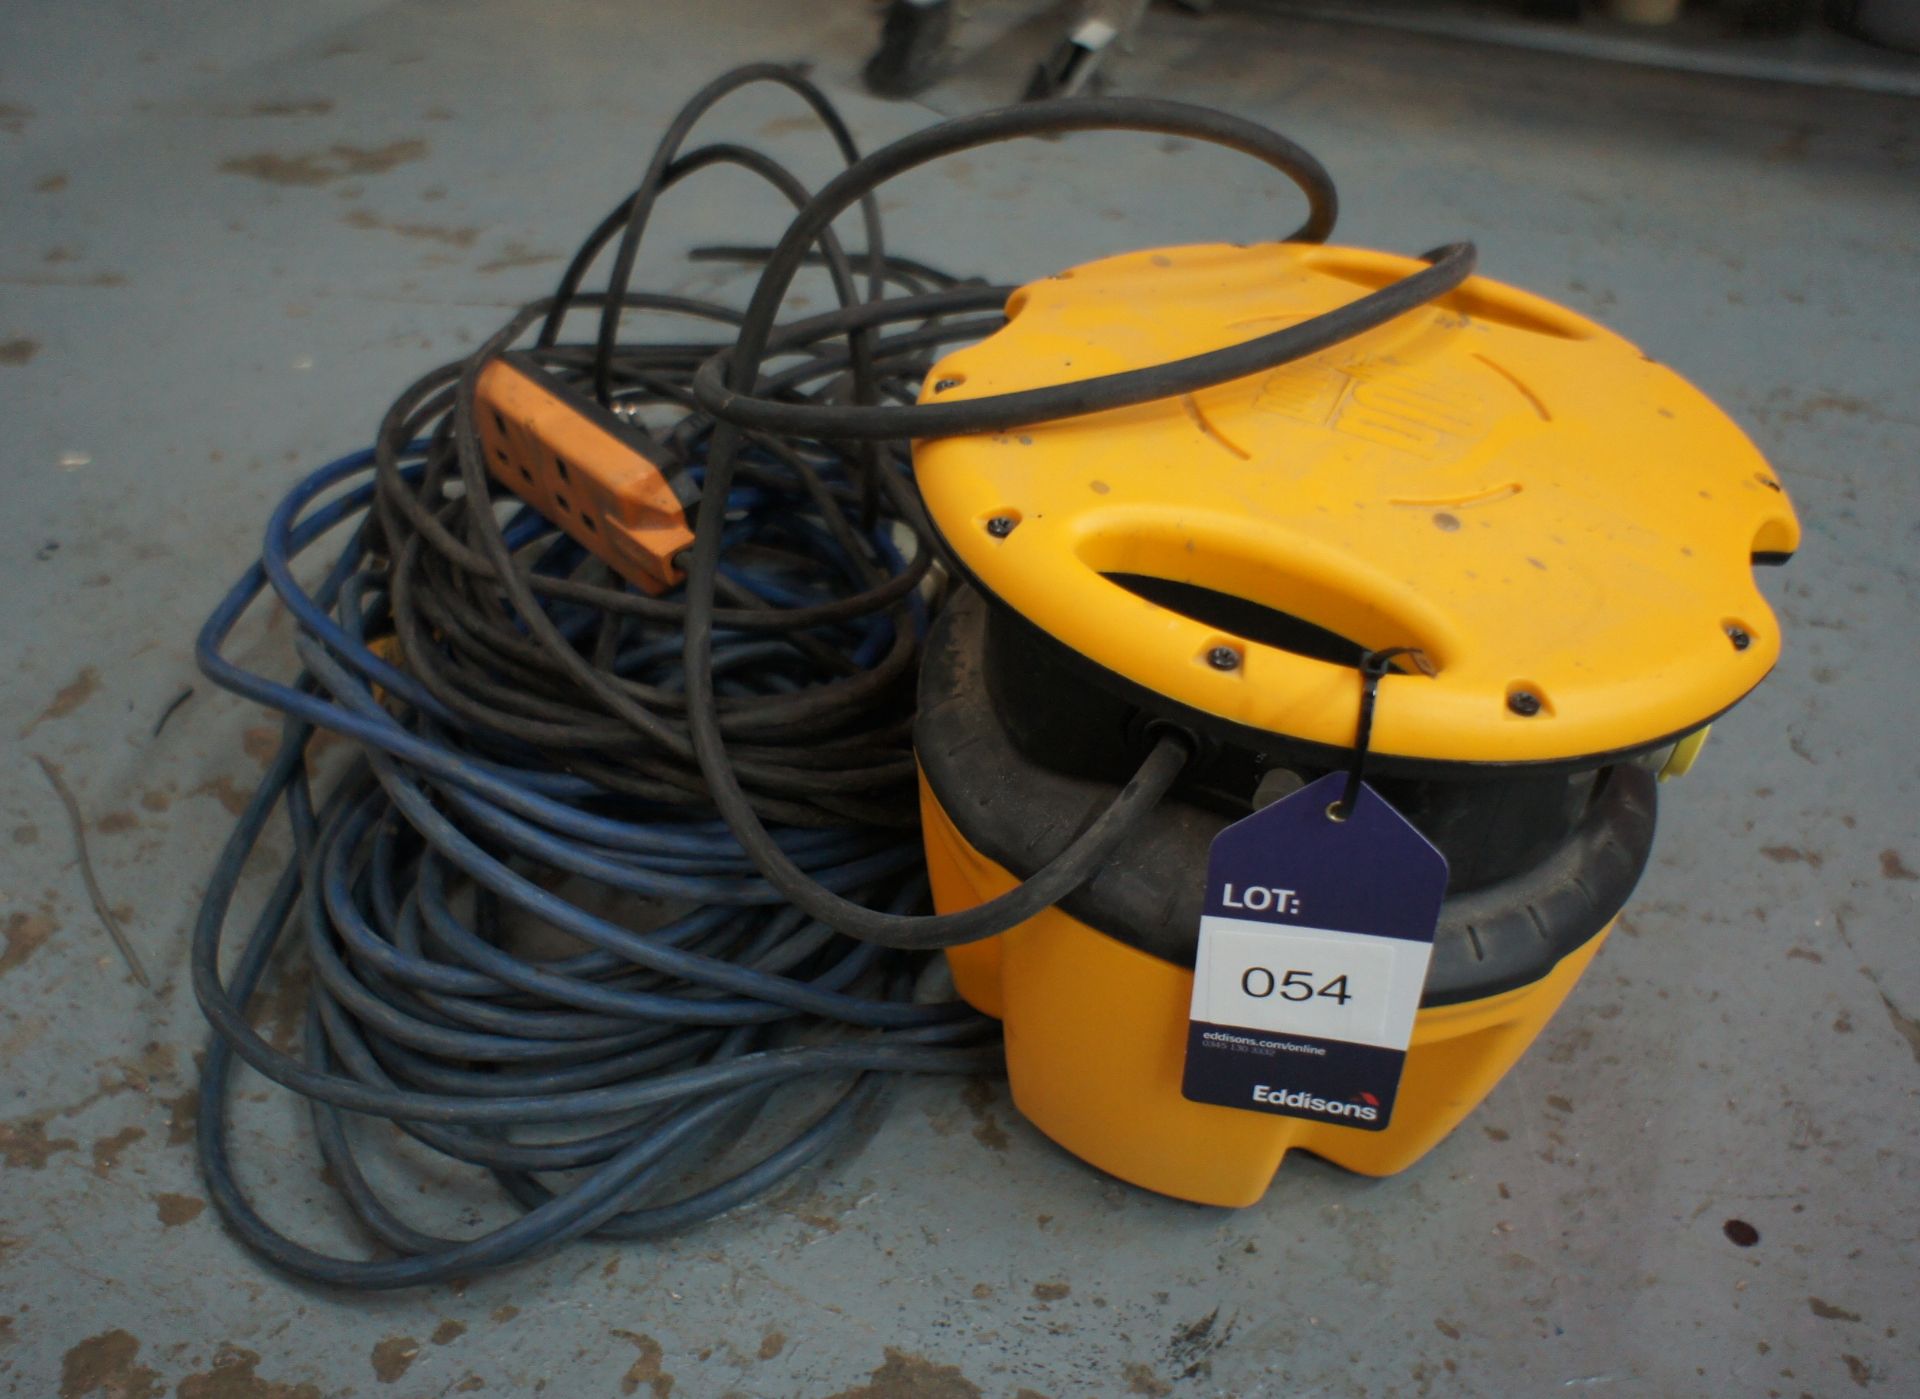 110volt transformer with various extension leads. - Image 2 of 2